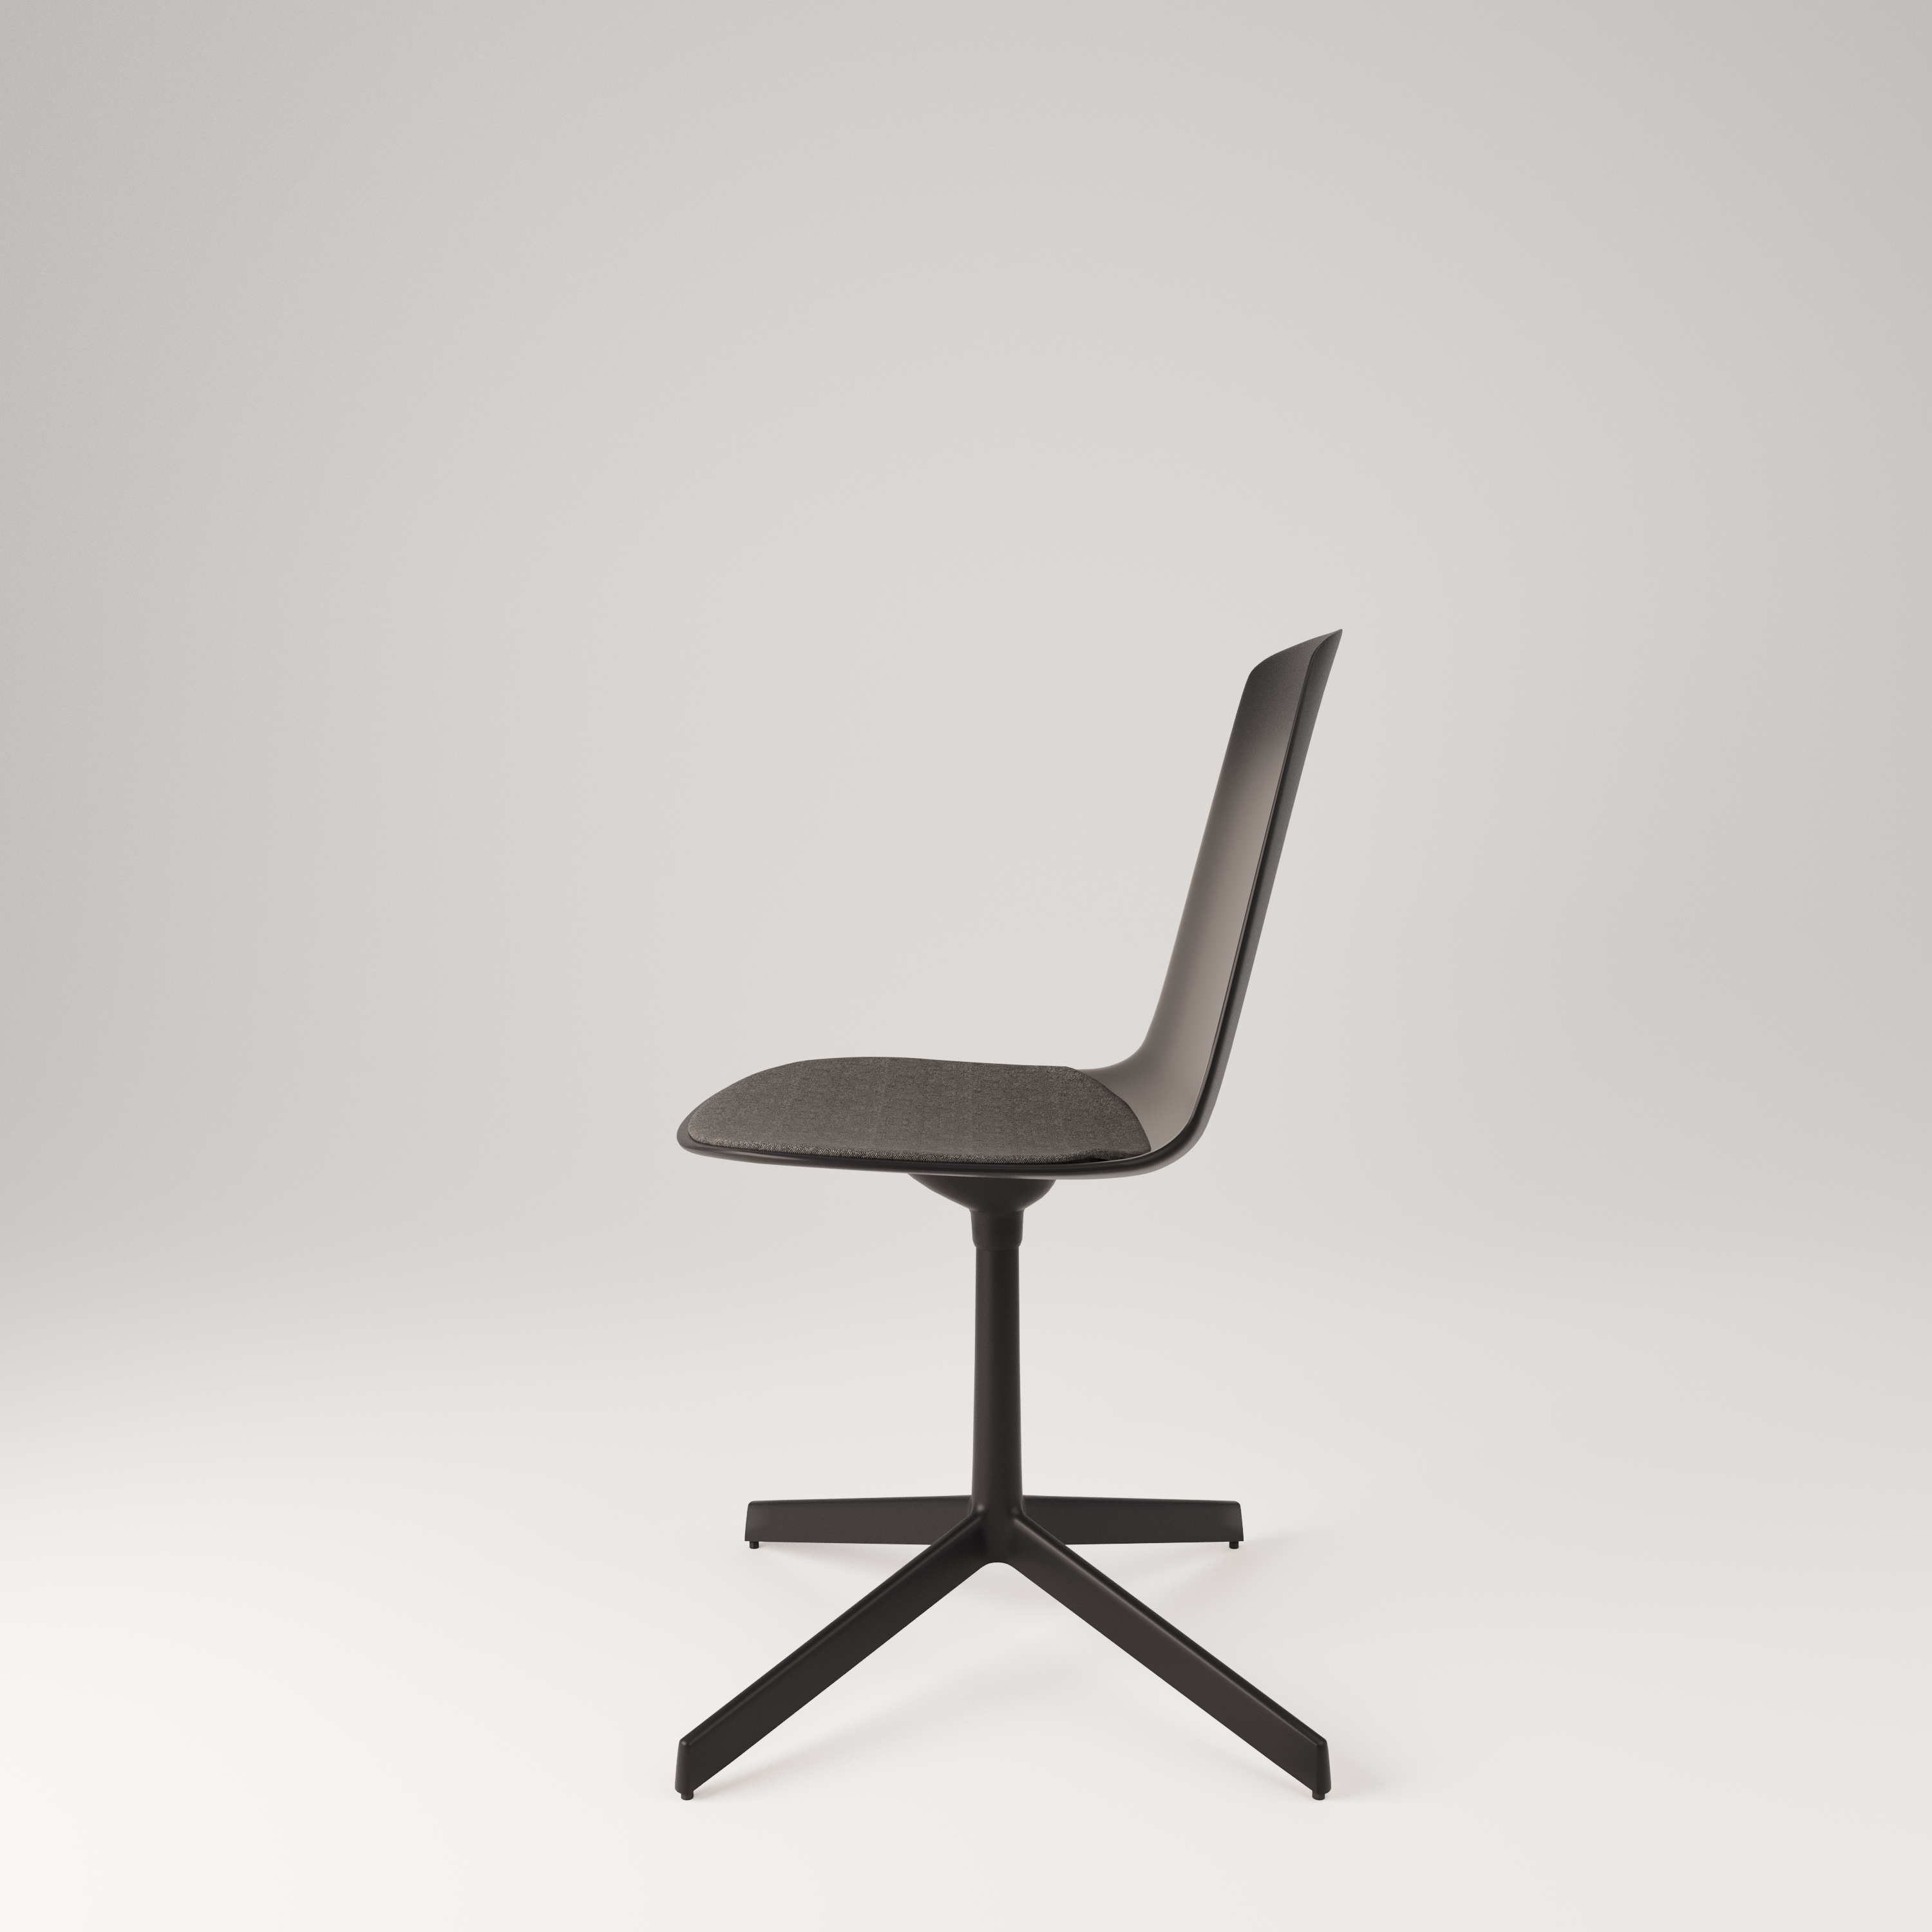 Conference chair Lottus High Confident, graphite gray, black stand